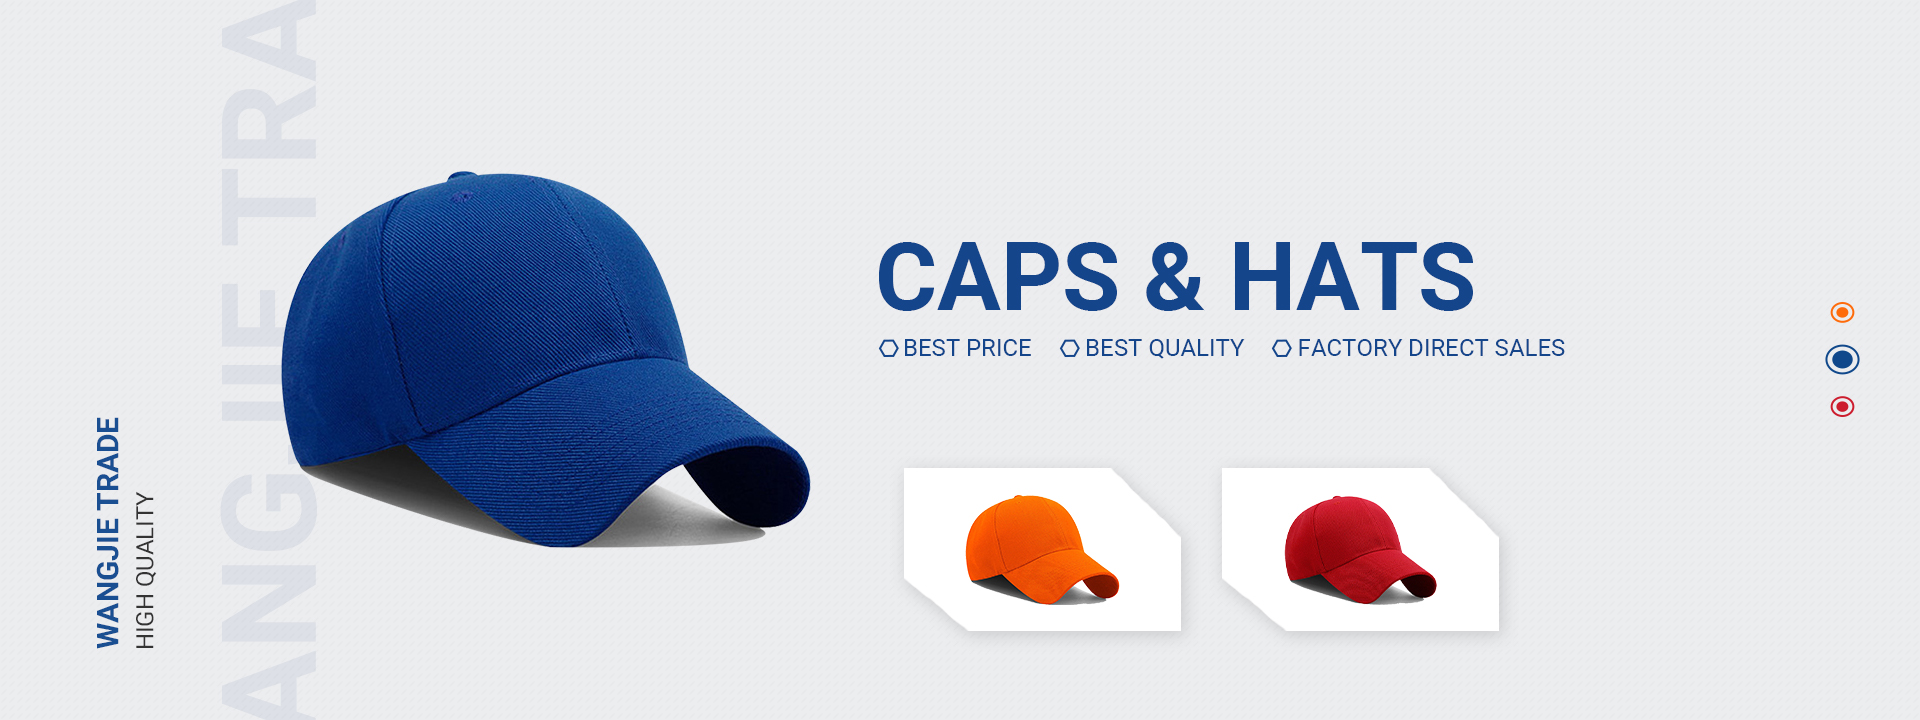 China Children Cap Manufacturers and Suppliers, Factory Pricelist